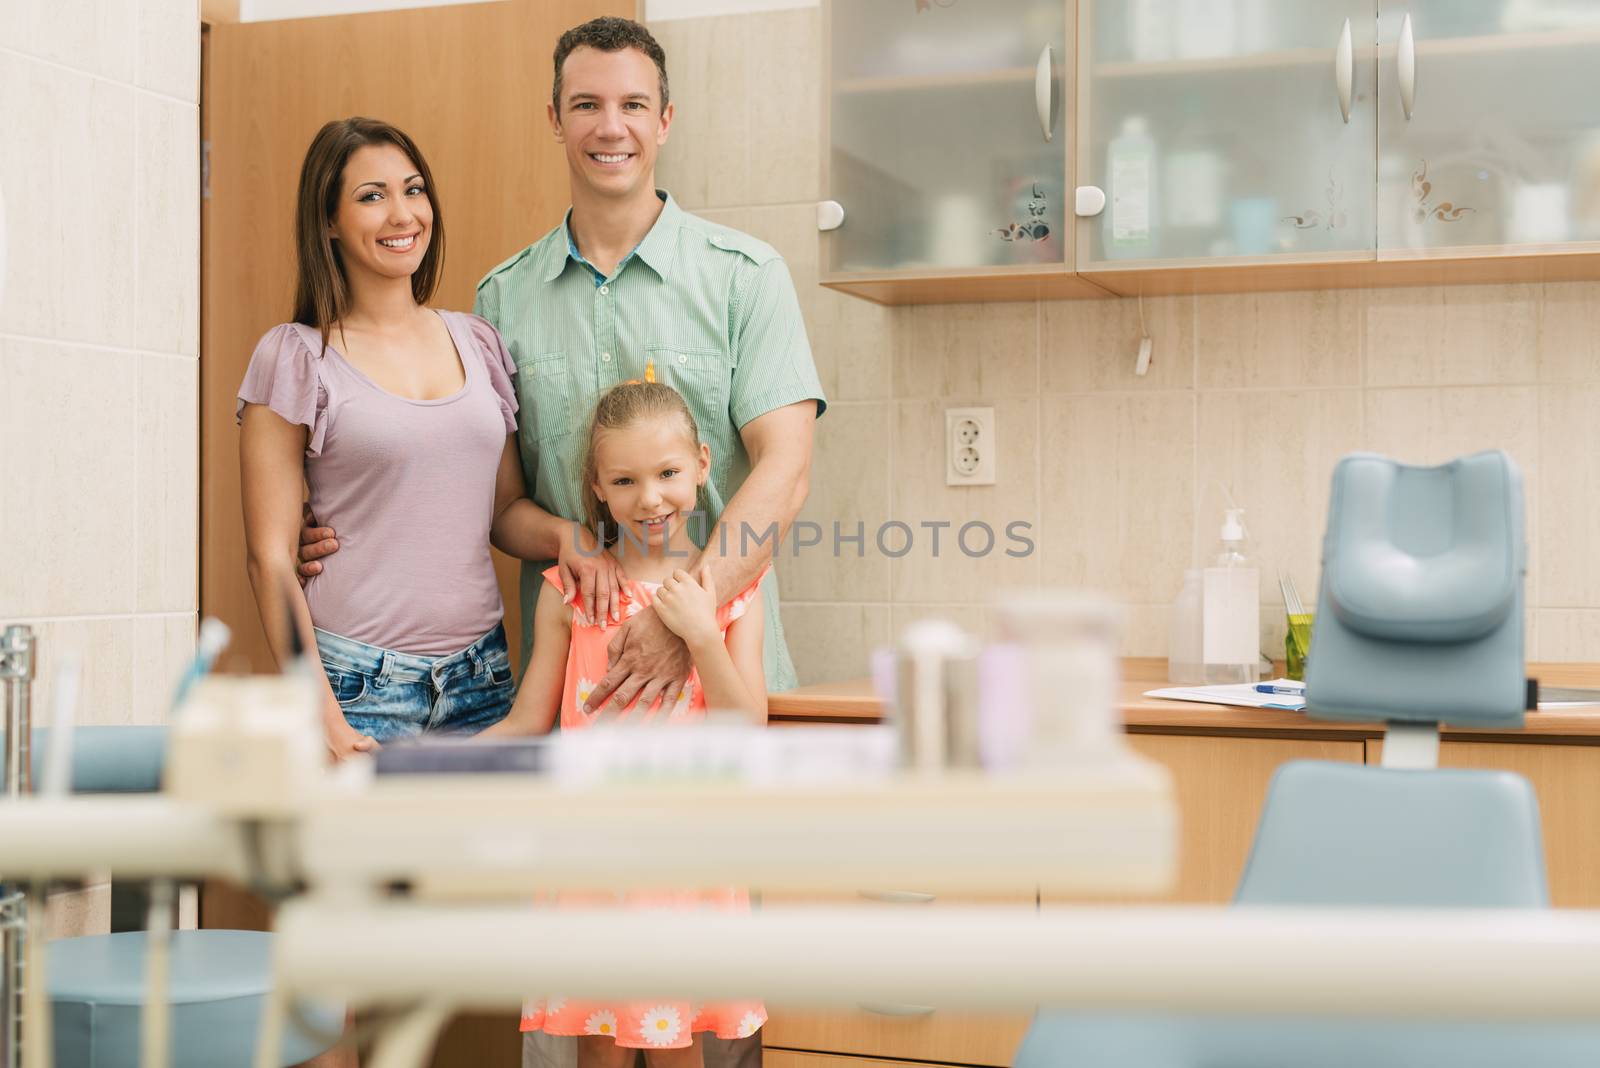 At The Dentist by MilanMarkovic78